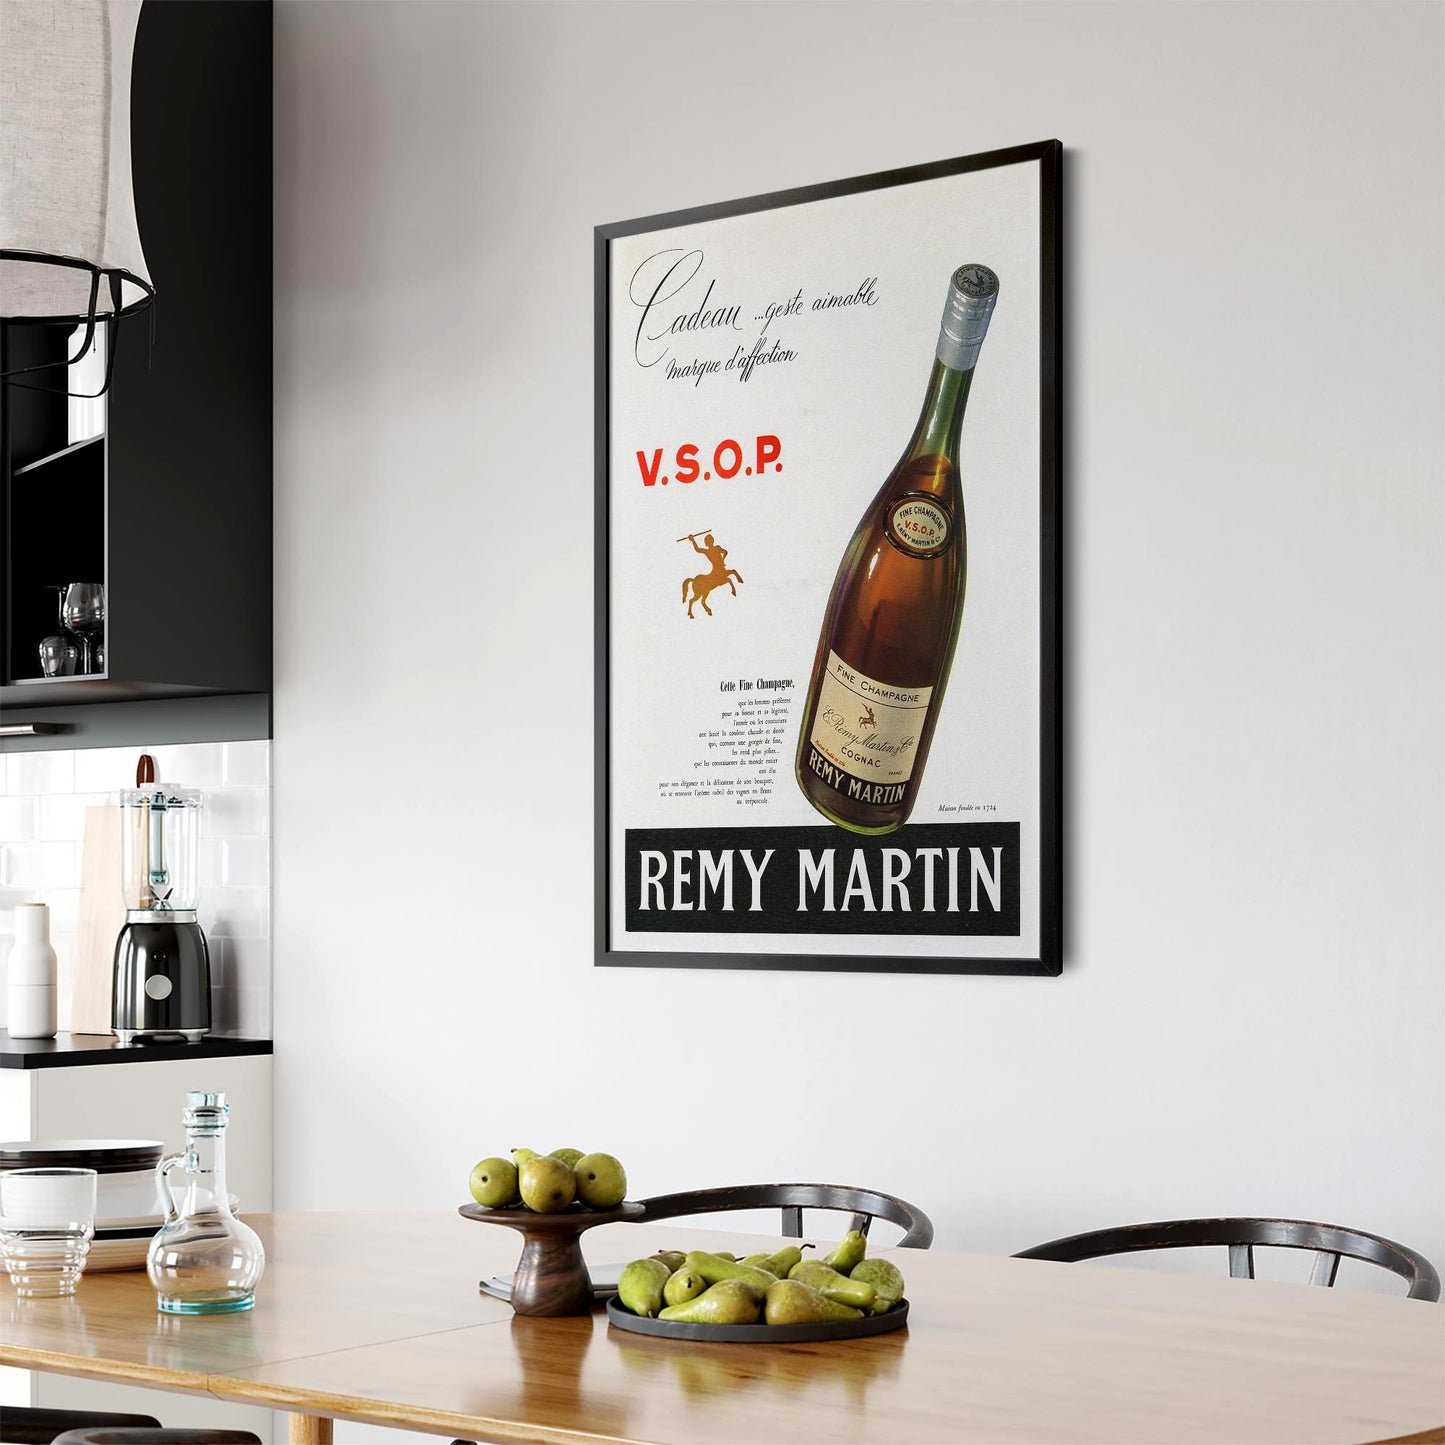 Remy Martin Cognac Champagne Vintage Drinks Advert Wall Art - The Affordable Art Company